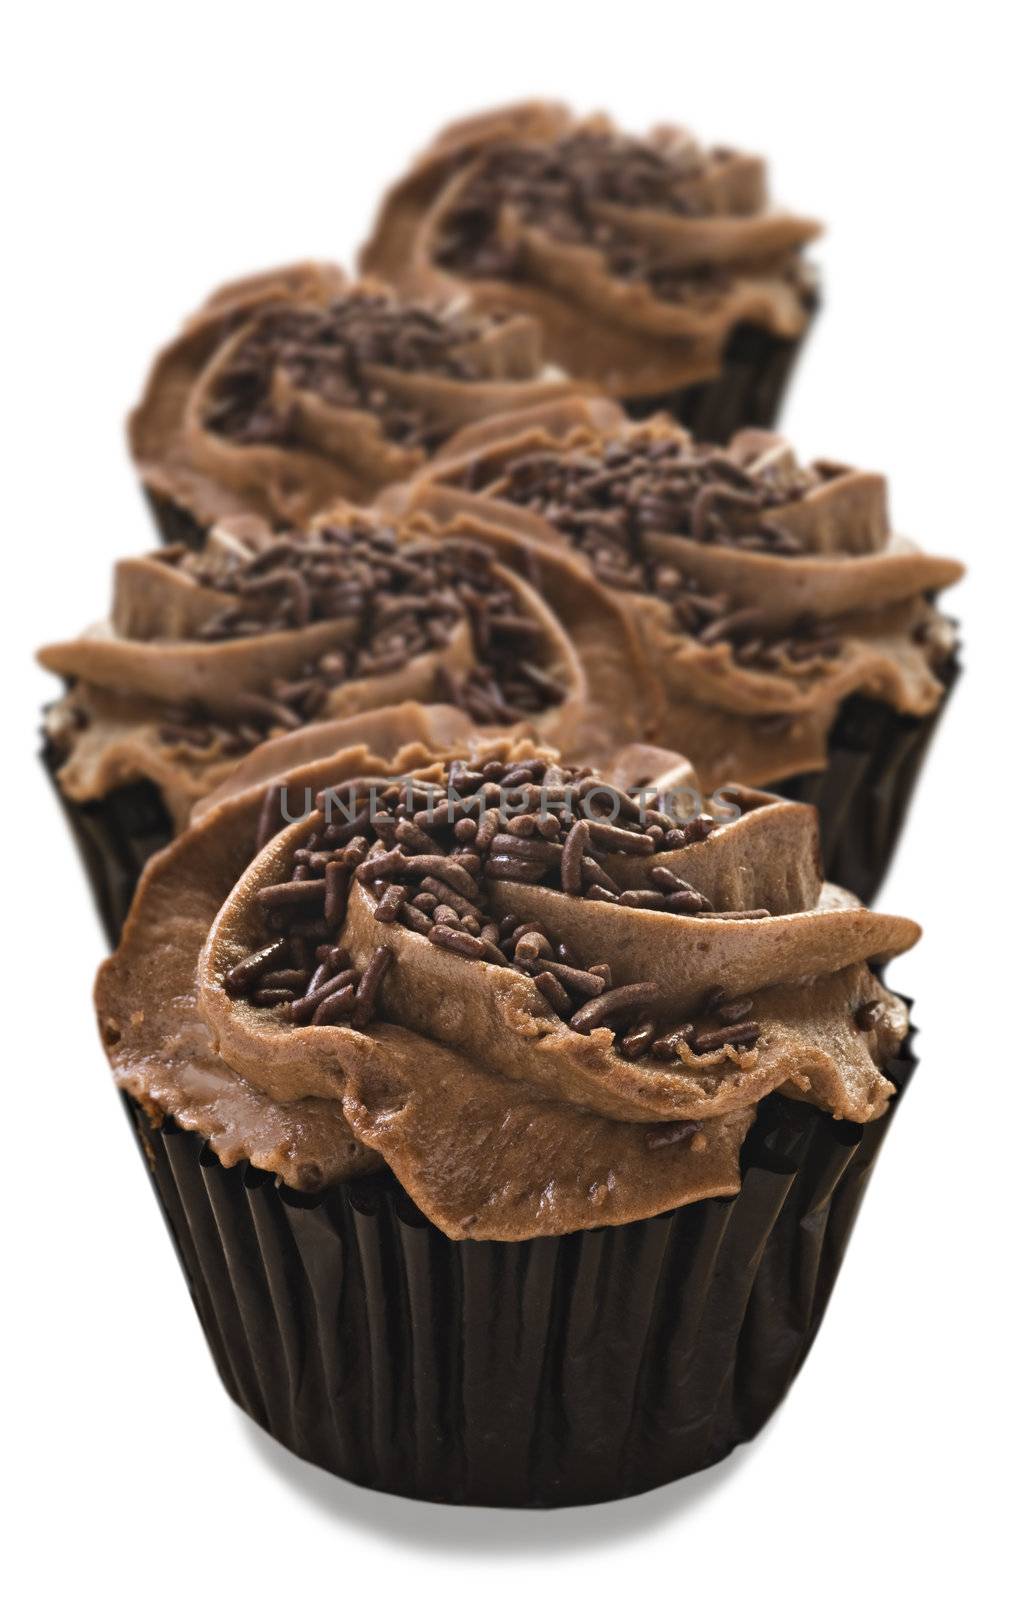 Lovely chocolate cupcakes - very shallow depth of field